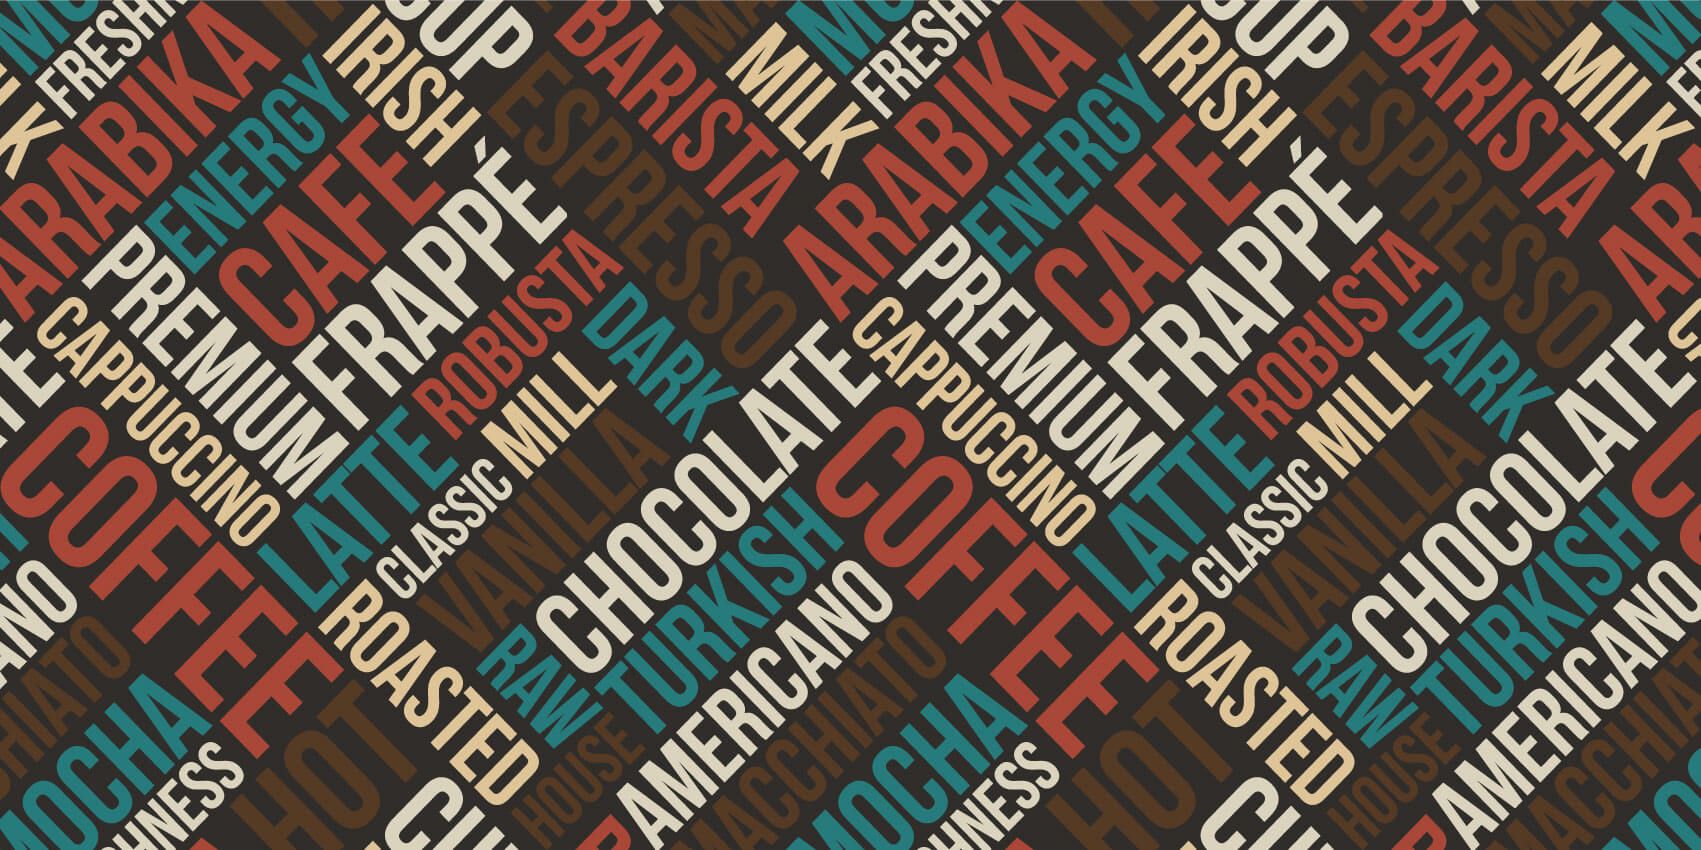 Other - Coffee and chocolate text - Kitchen